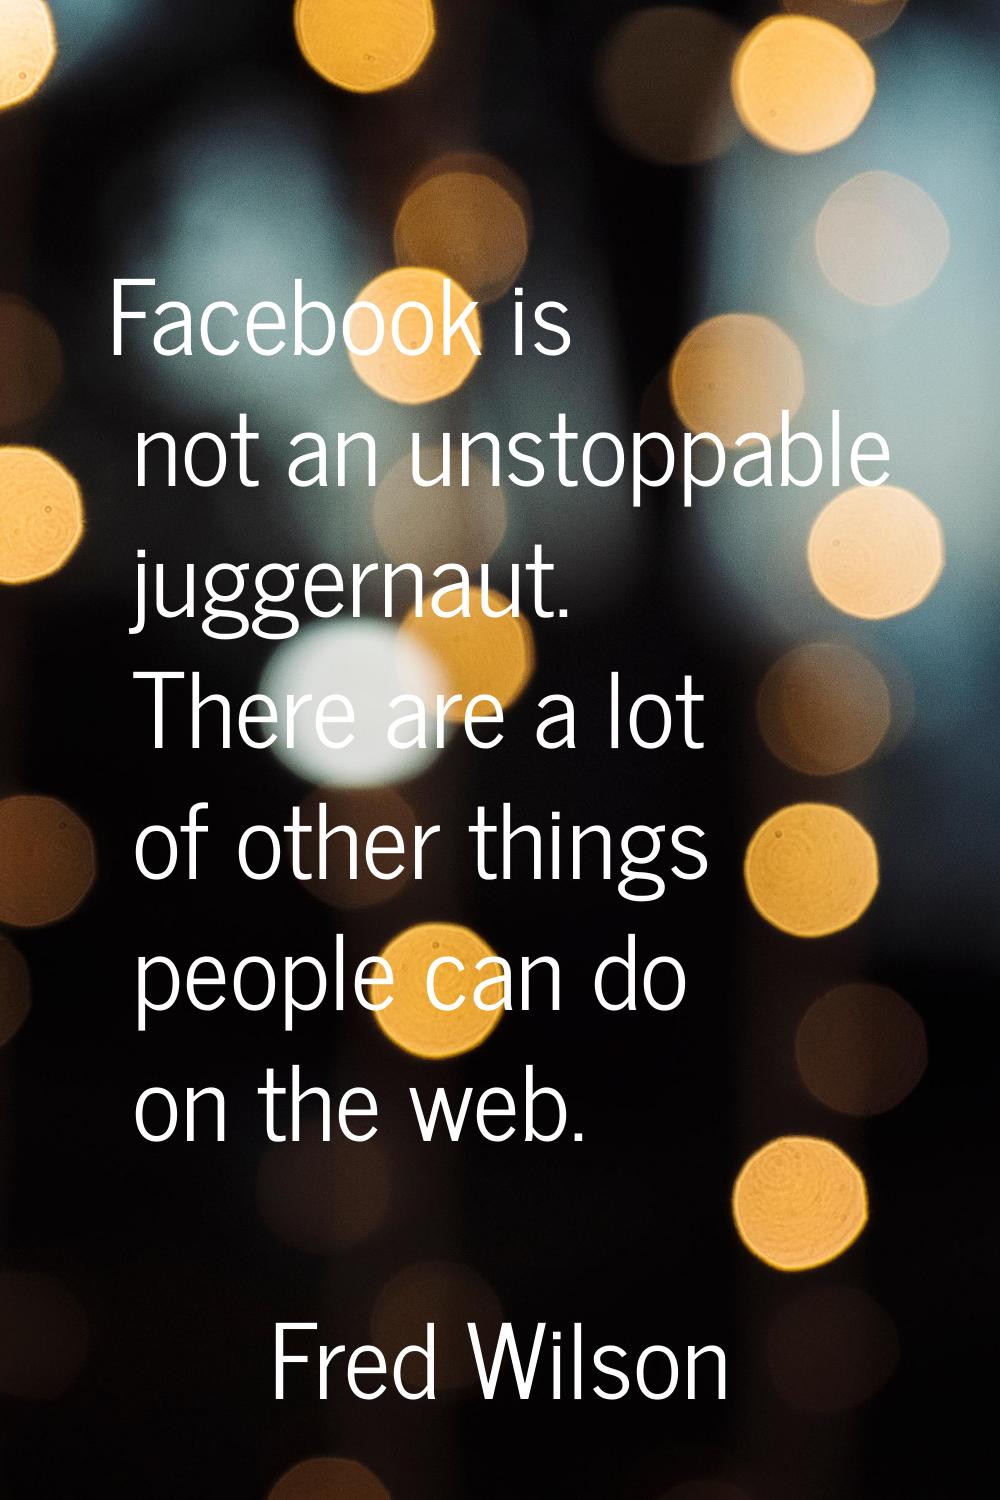 Facebook is not an unstoppable juggernaut. There are a lot of other things people can do on the web